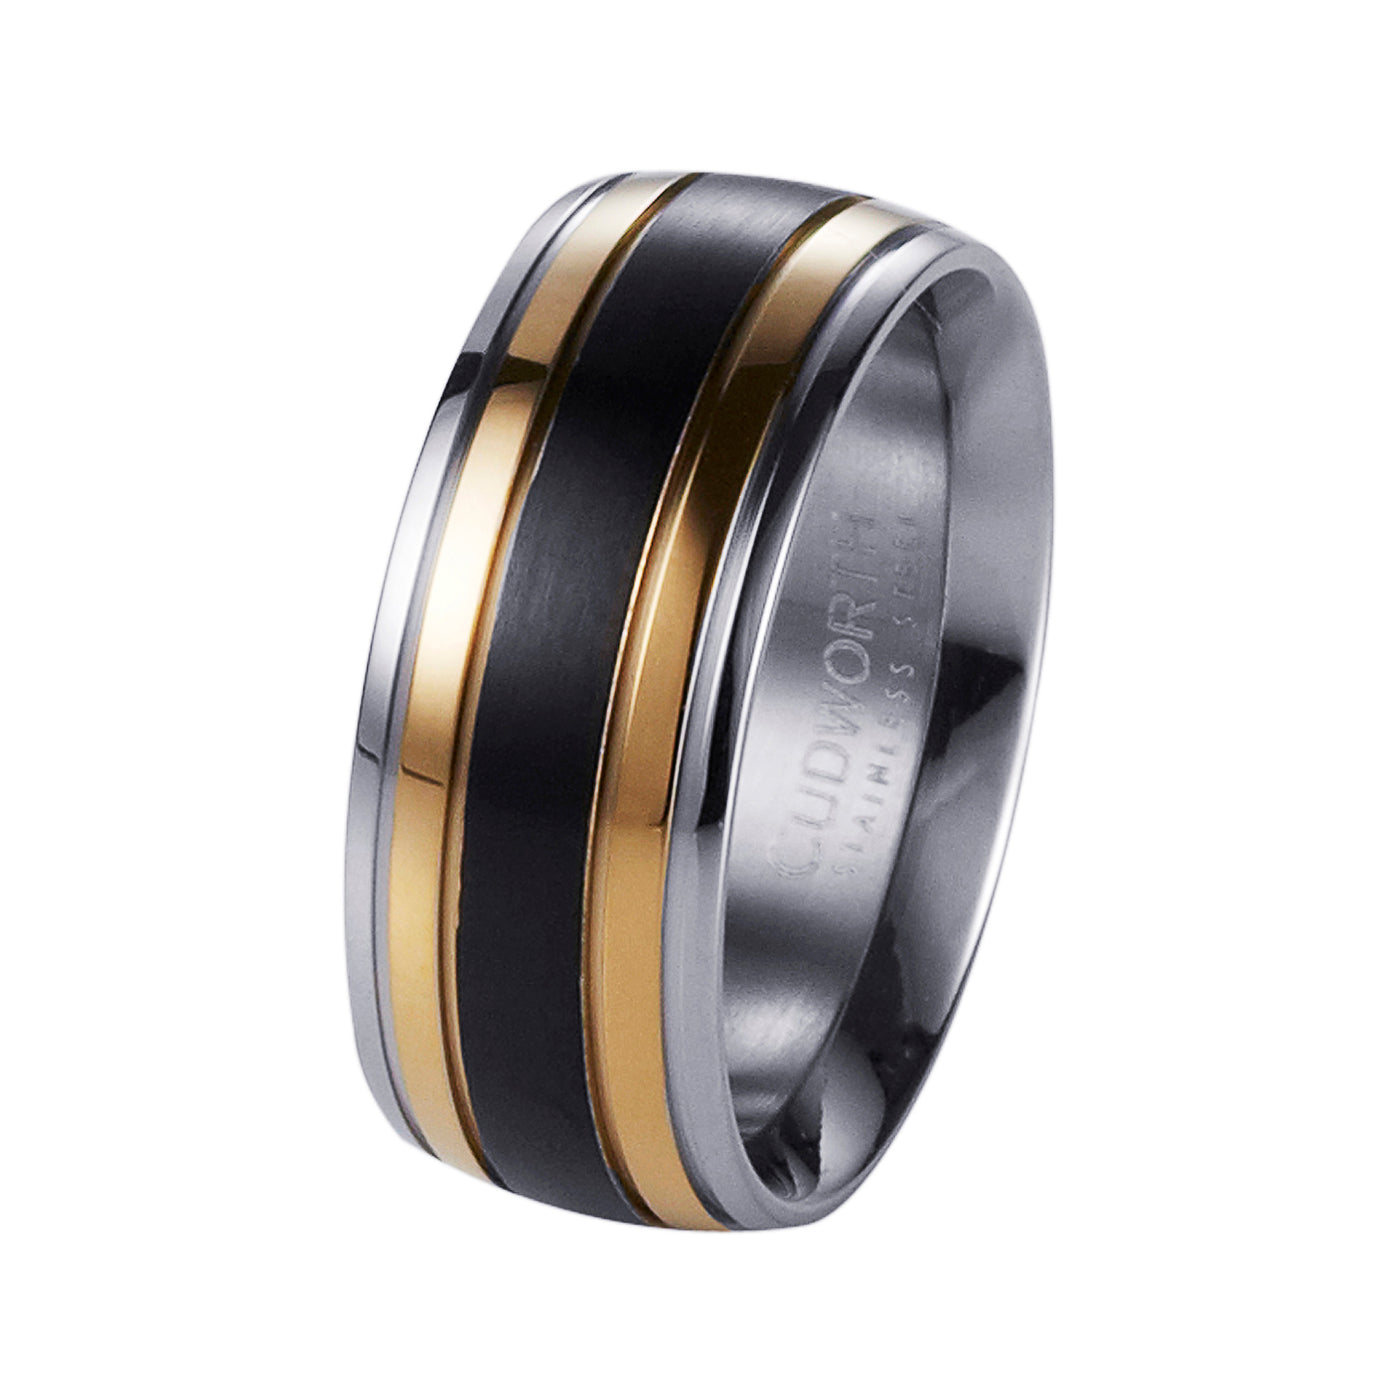 Mens Stainless Steel Gold Plate Dress Ring.